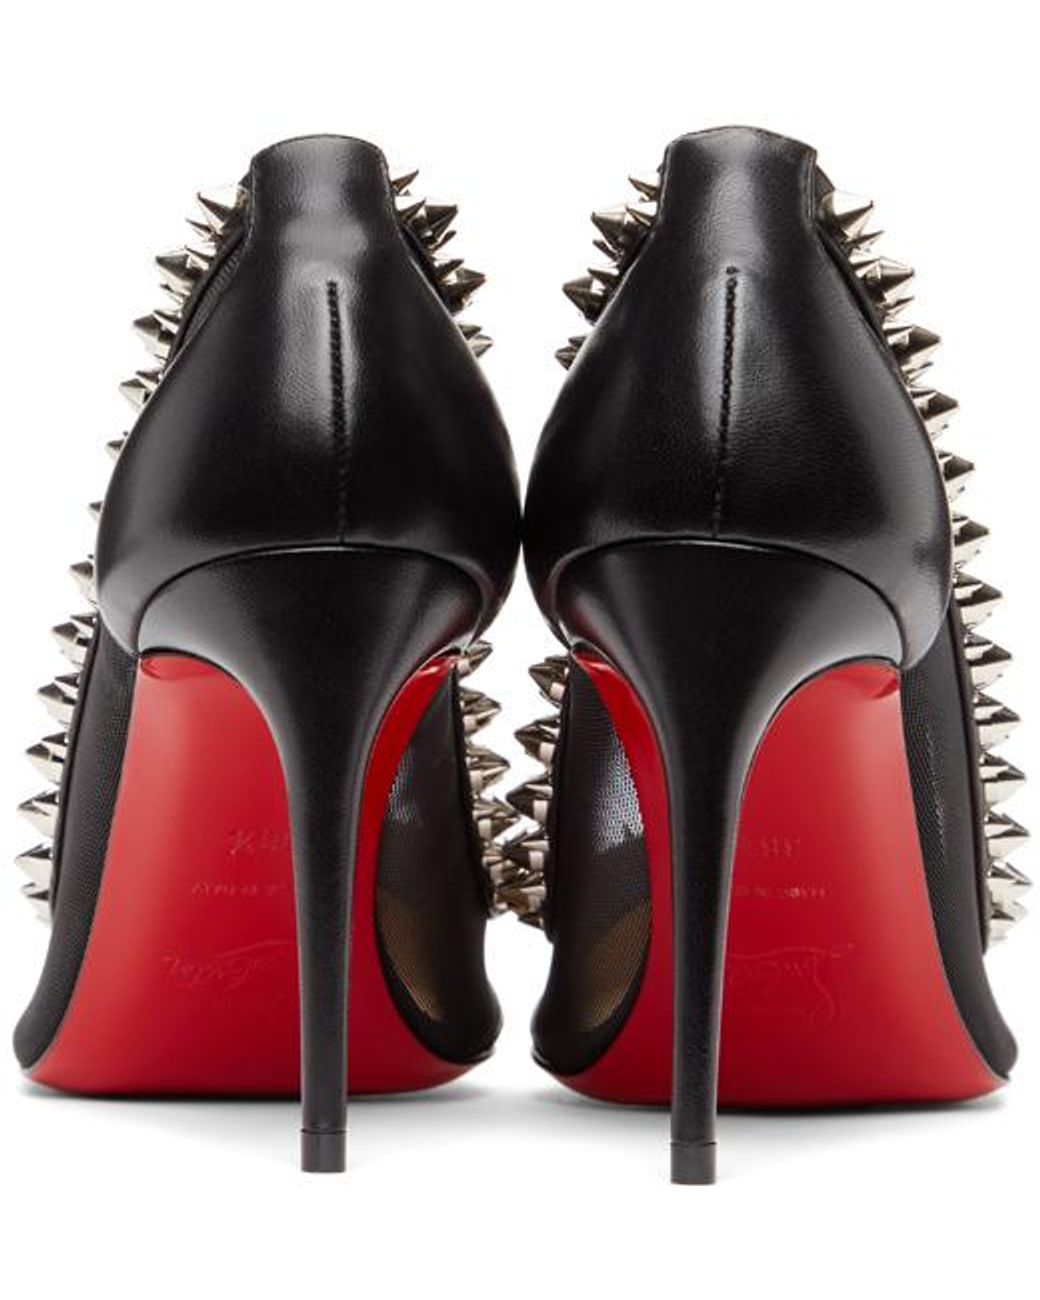 louis vuitton shoes for men red bottoms spikes heels